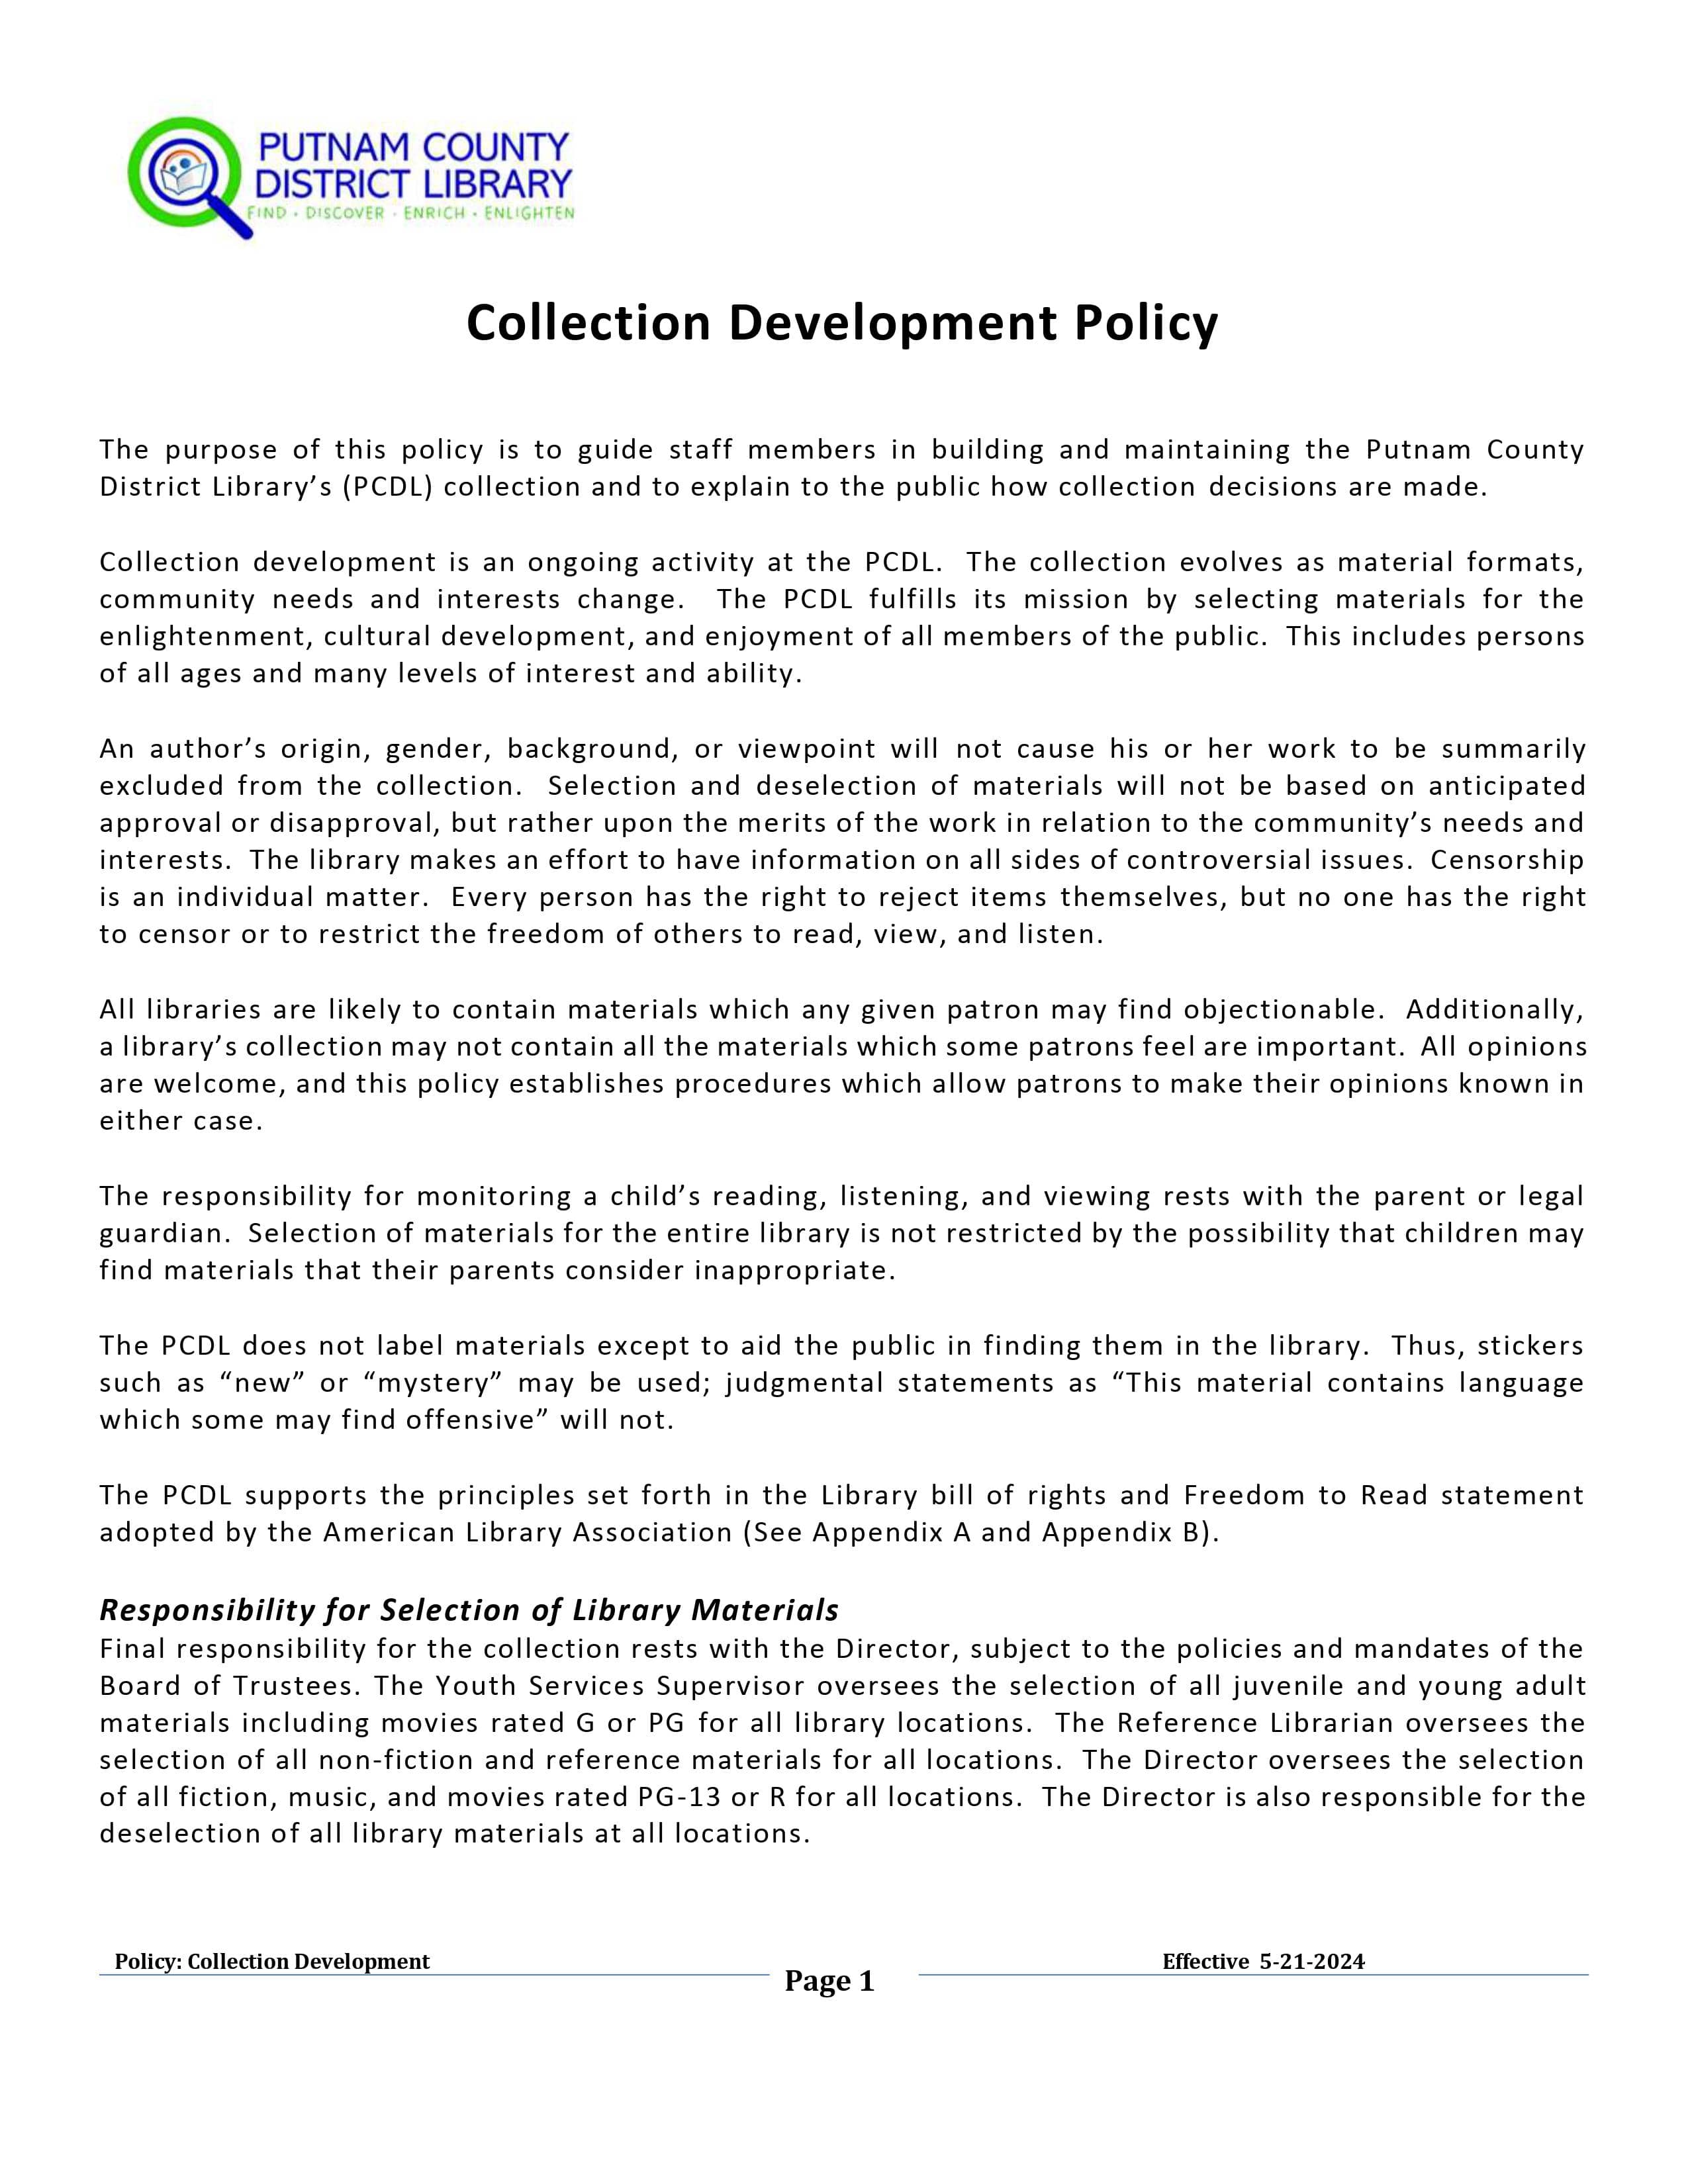 Collection Development Policy Page 1